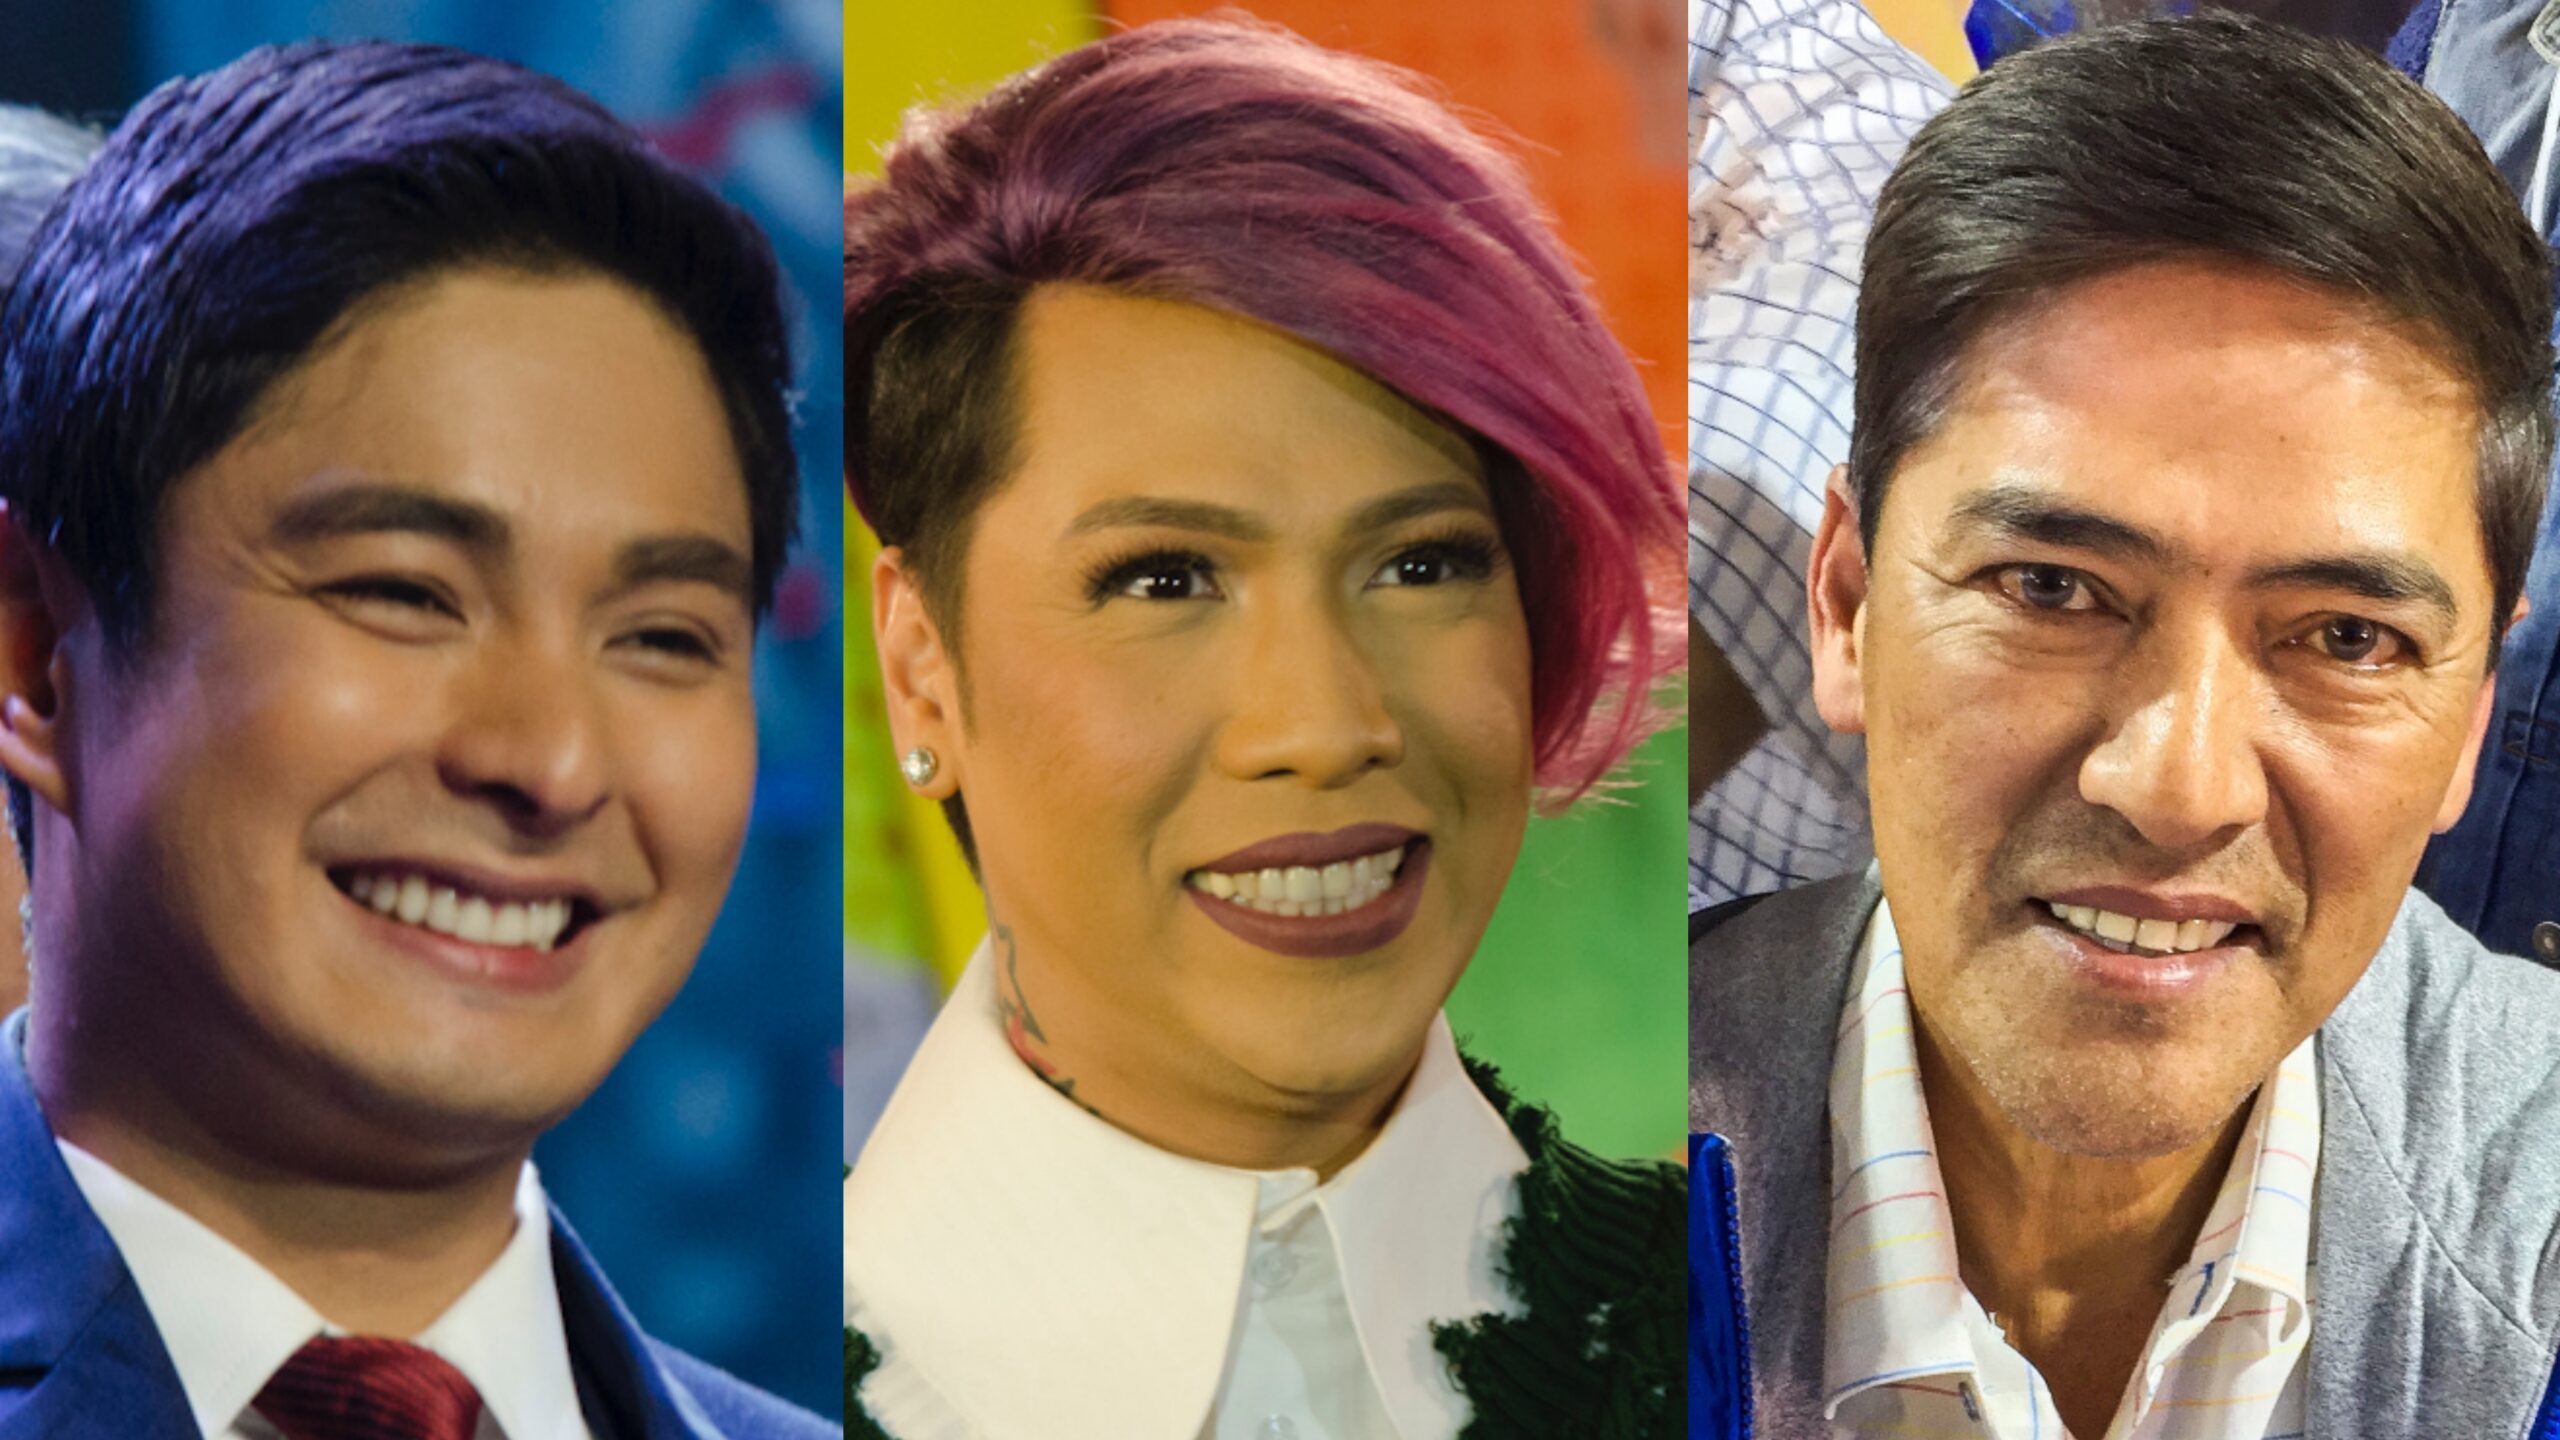 MMFF announces first 4 official entries for 2017 festival